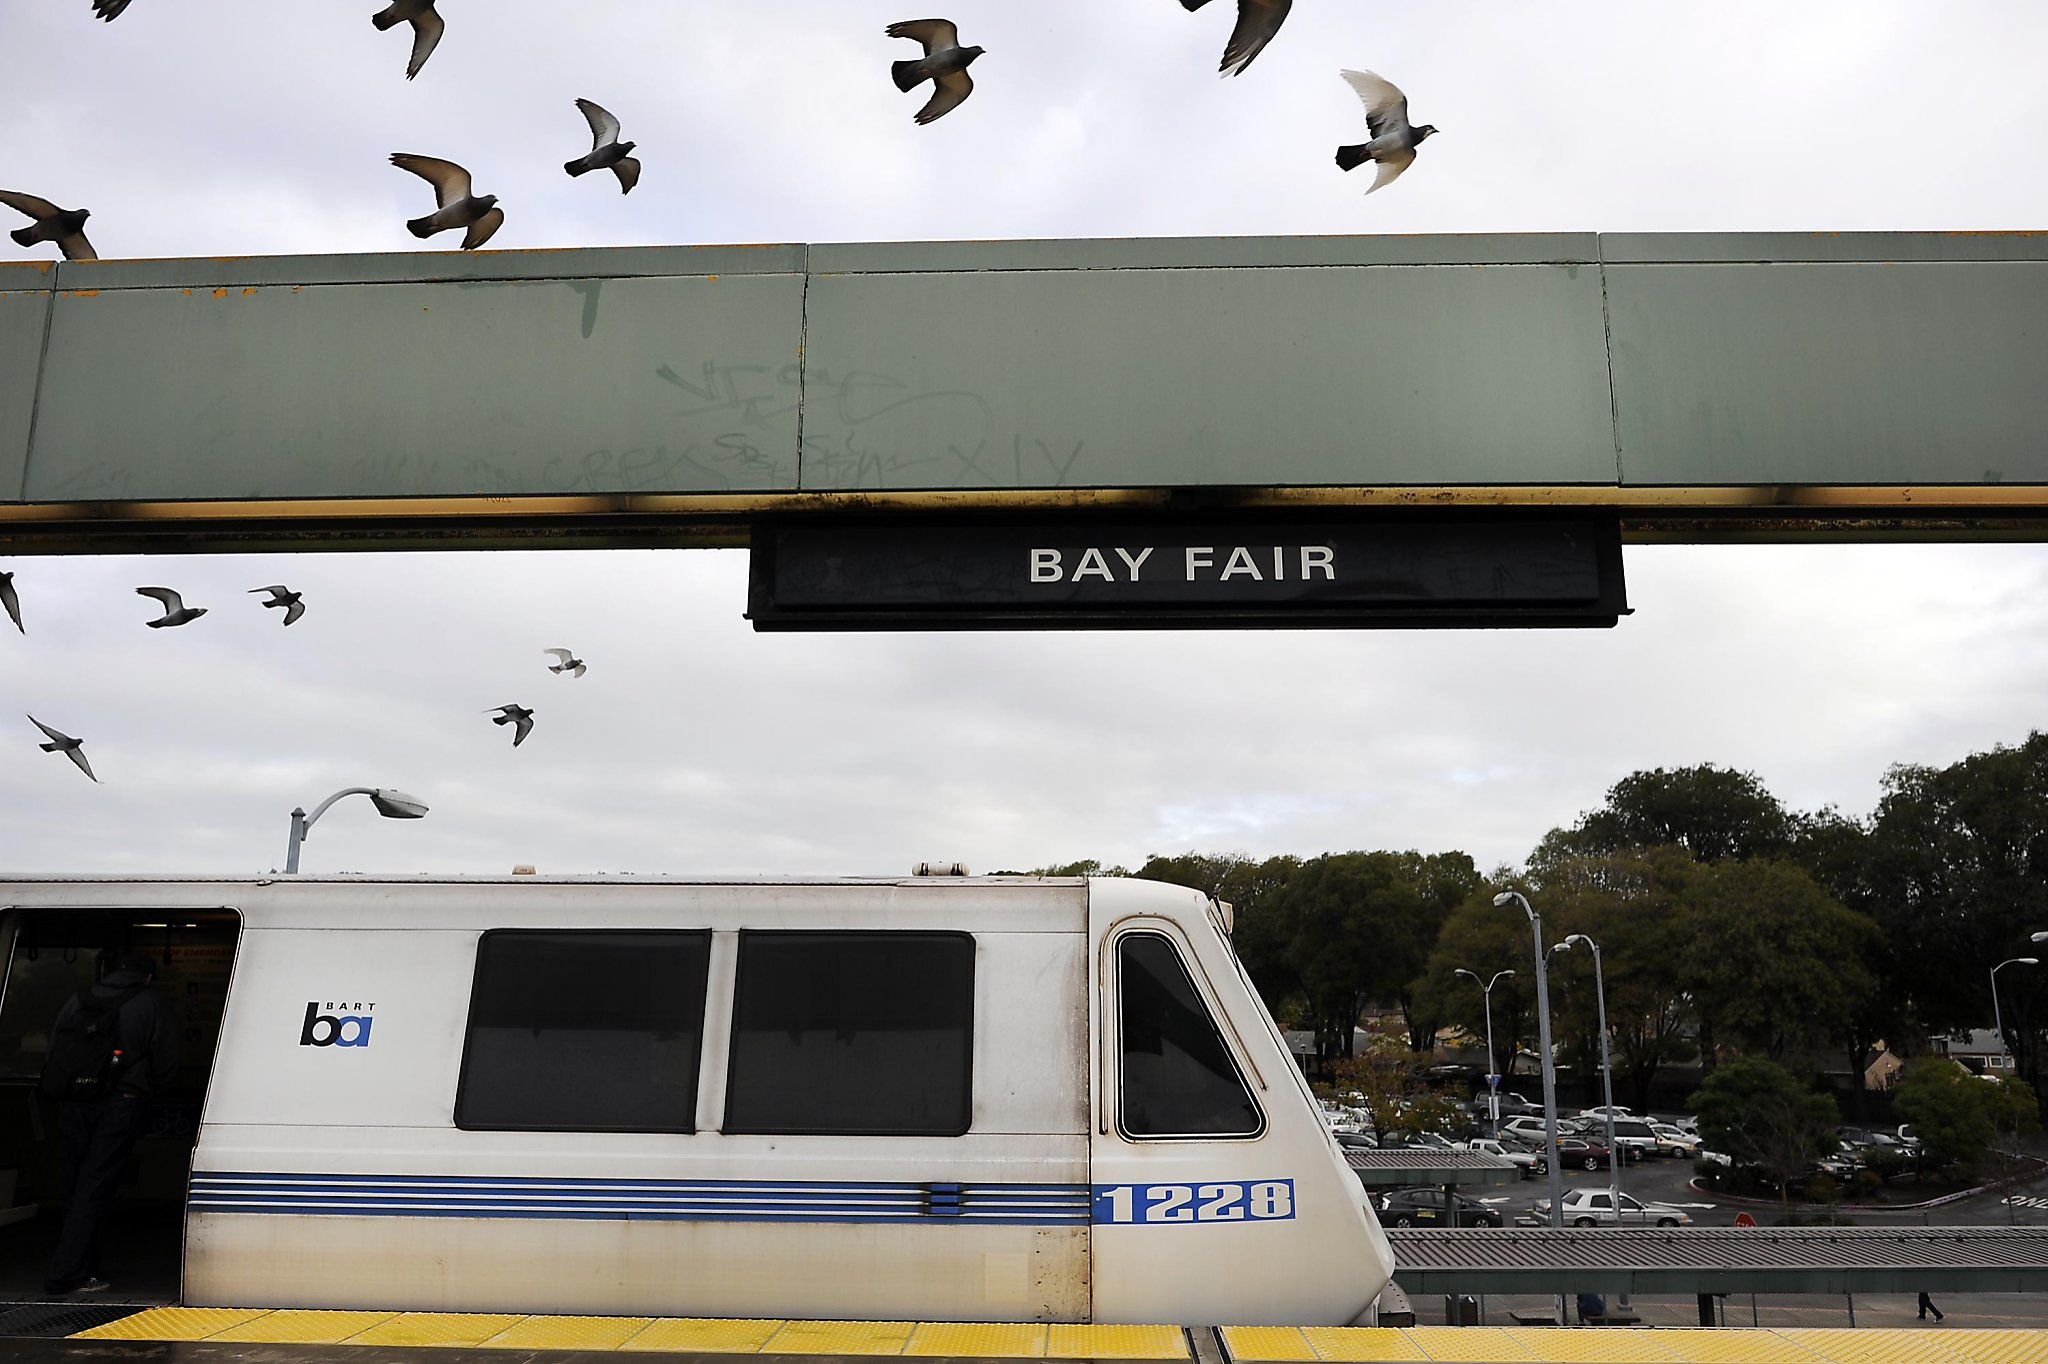 Best Bay Area cities to live if you want to commute to SF, according to